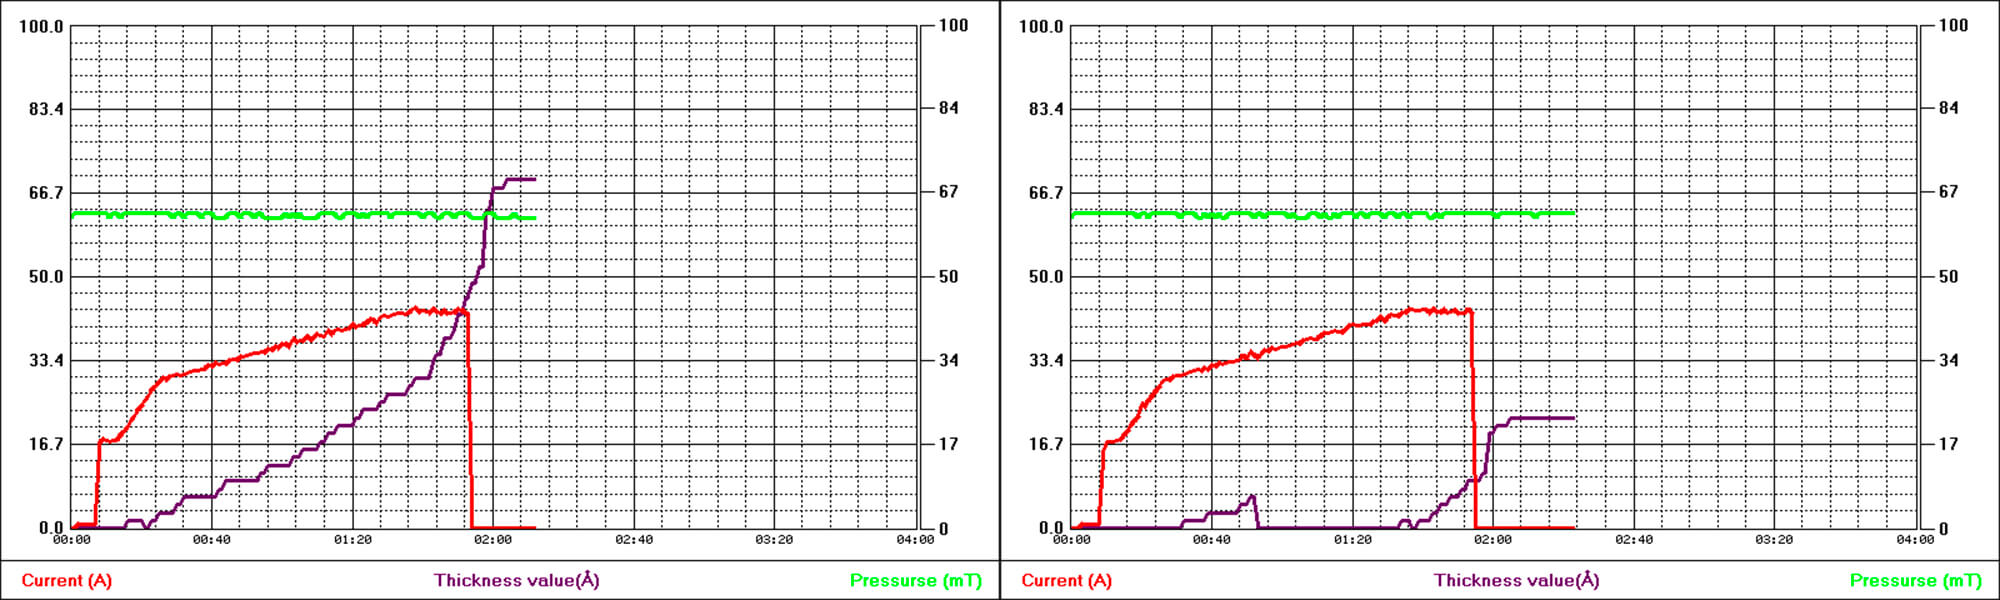 Silver-Coated QCM (Left) Versus Gold-Coated QCM (Right) Thickness Monitoring During Ramped Carbon Rod Evaporation Process. The red line is the electric current passing through the carbon rod, the purple line displays the measured thickness, and the green line is the chamber pressure